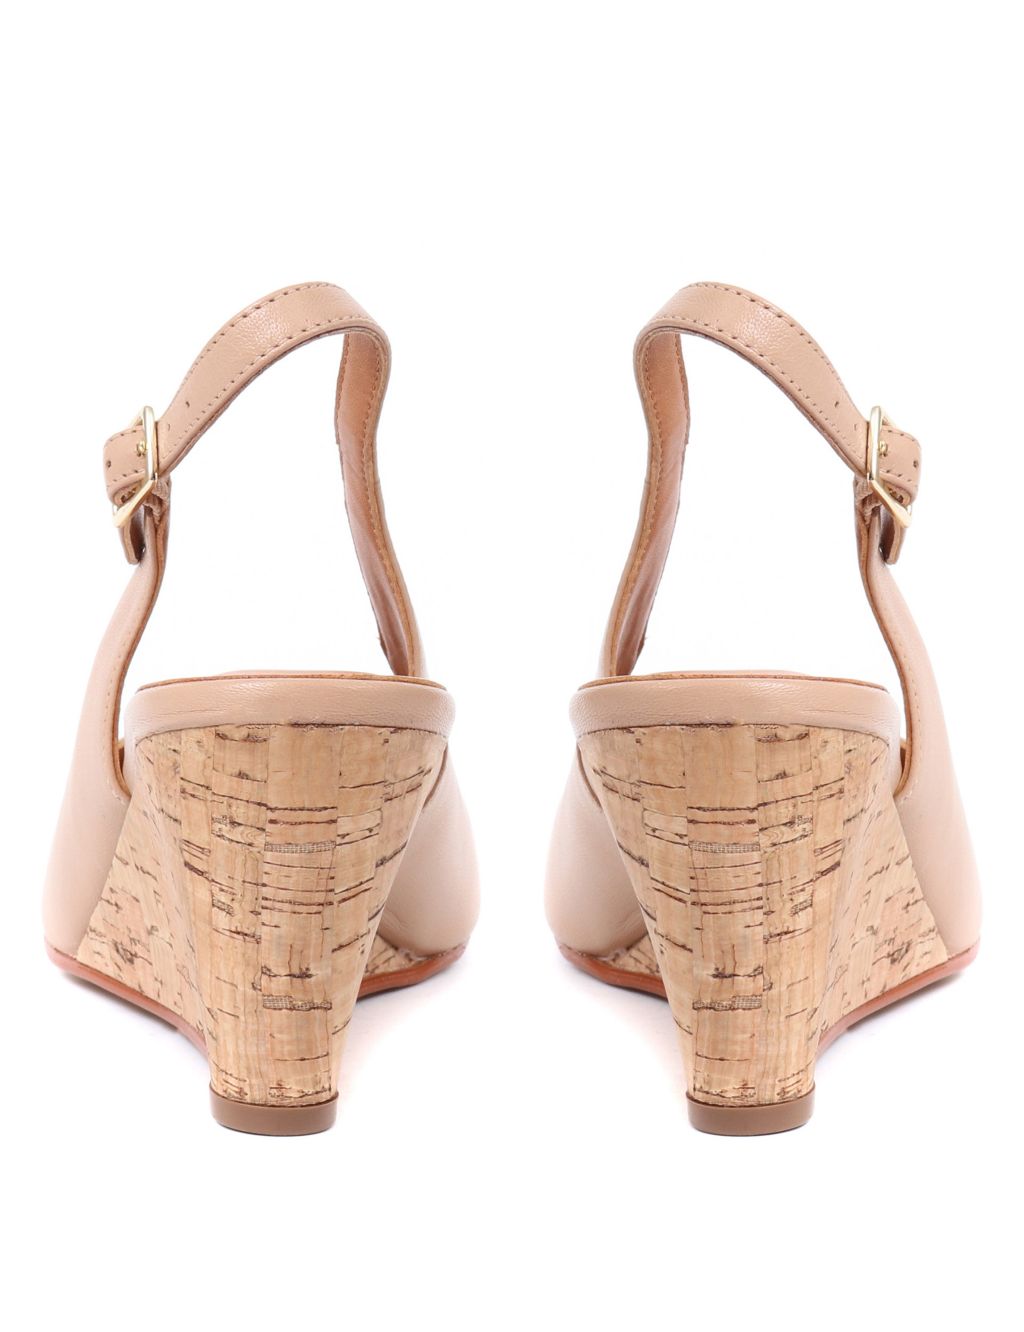 Suede Wedge Slingback Shoes image 4